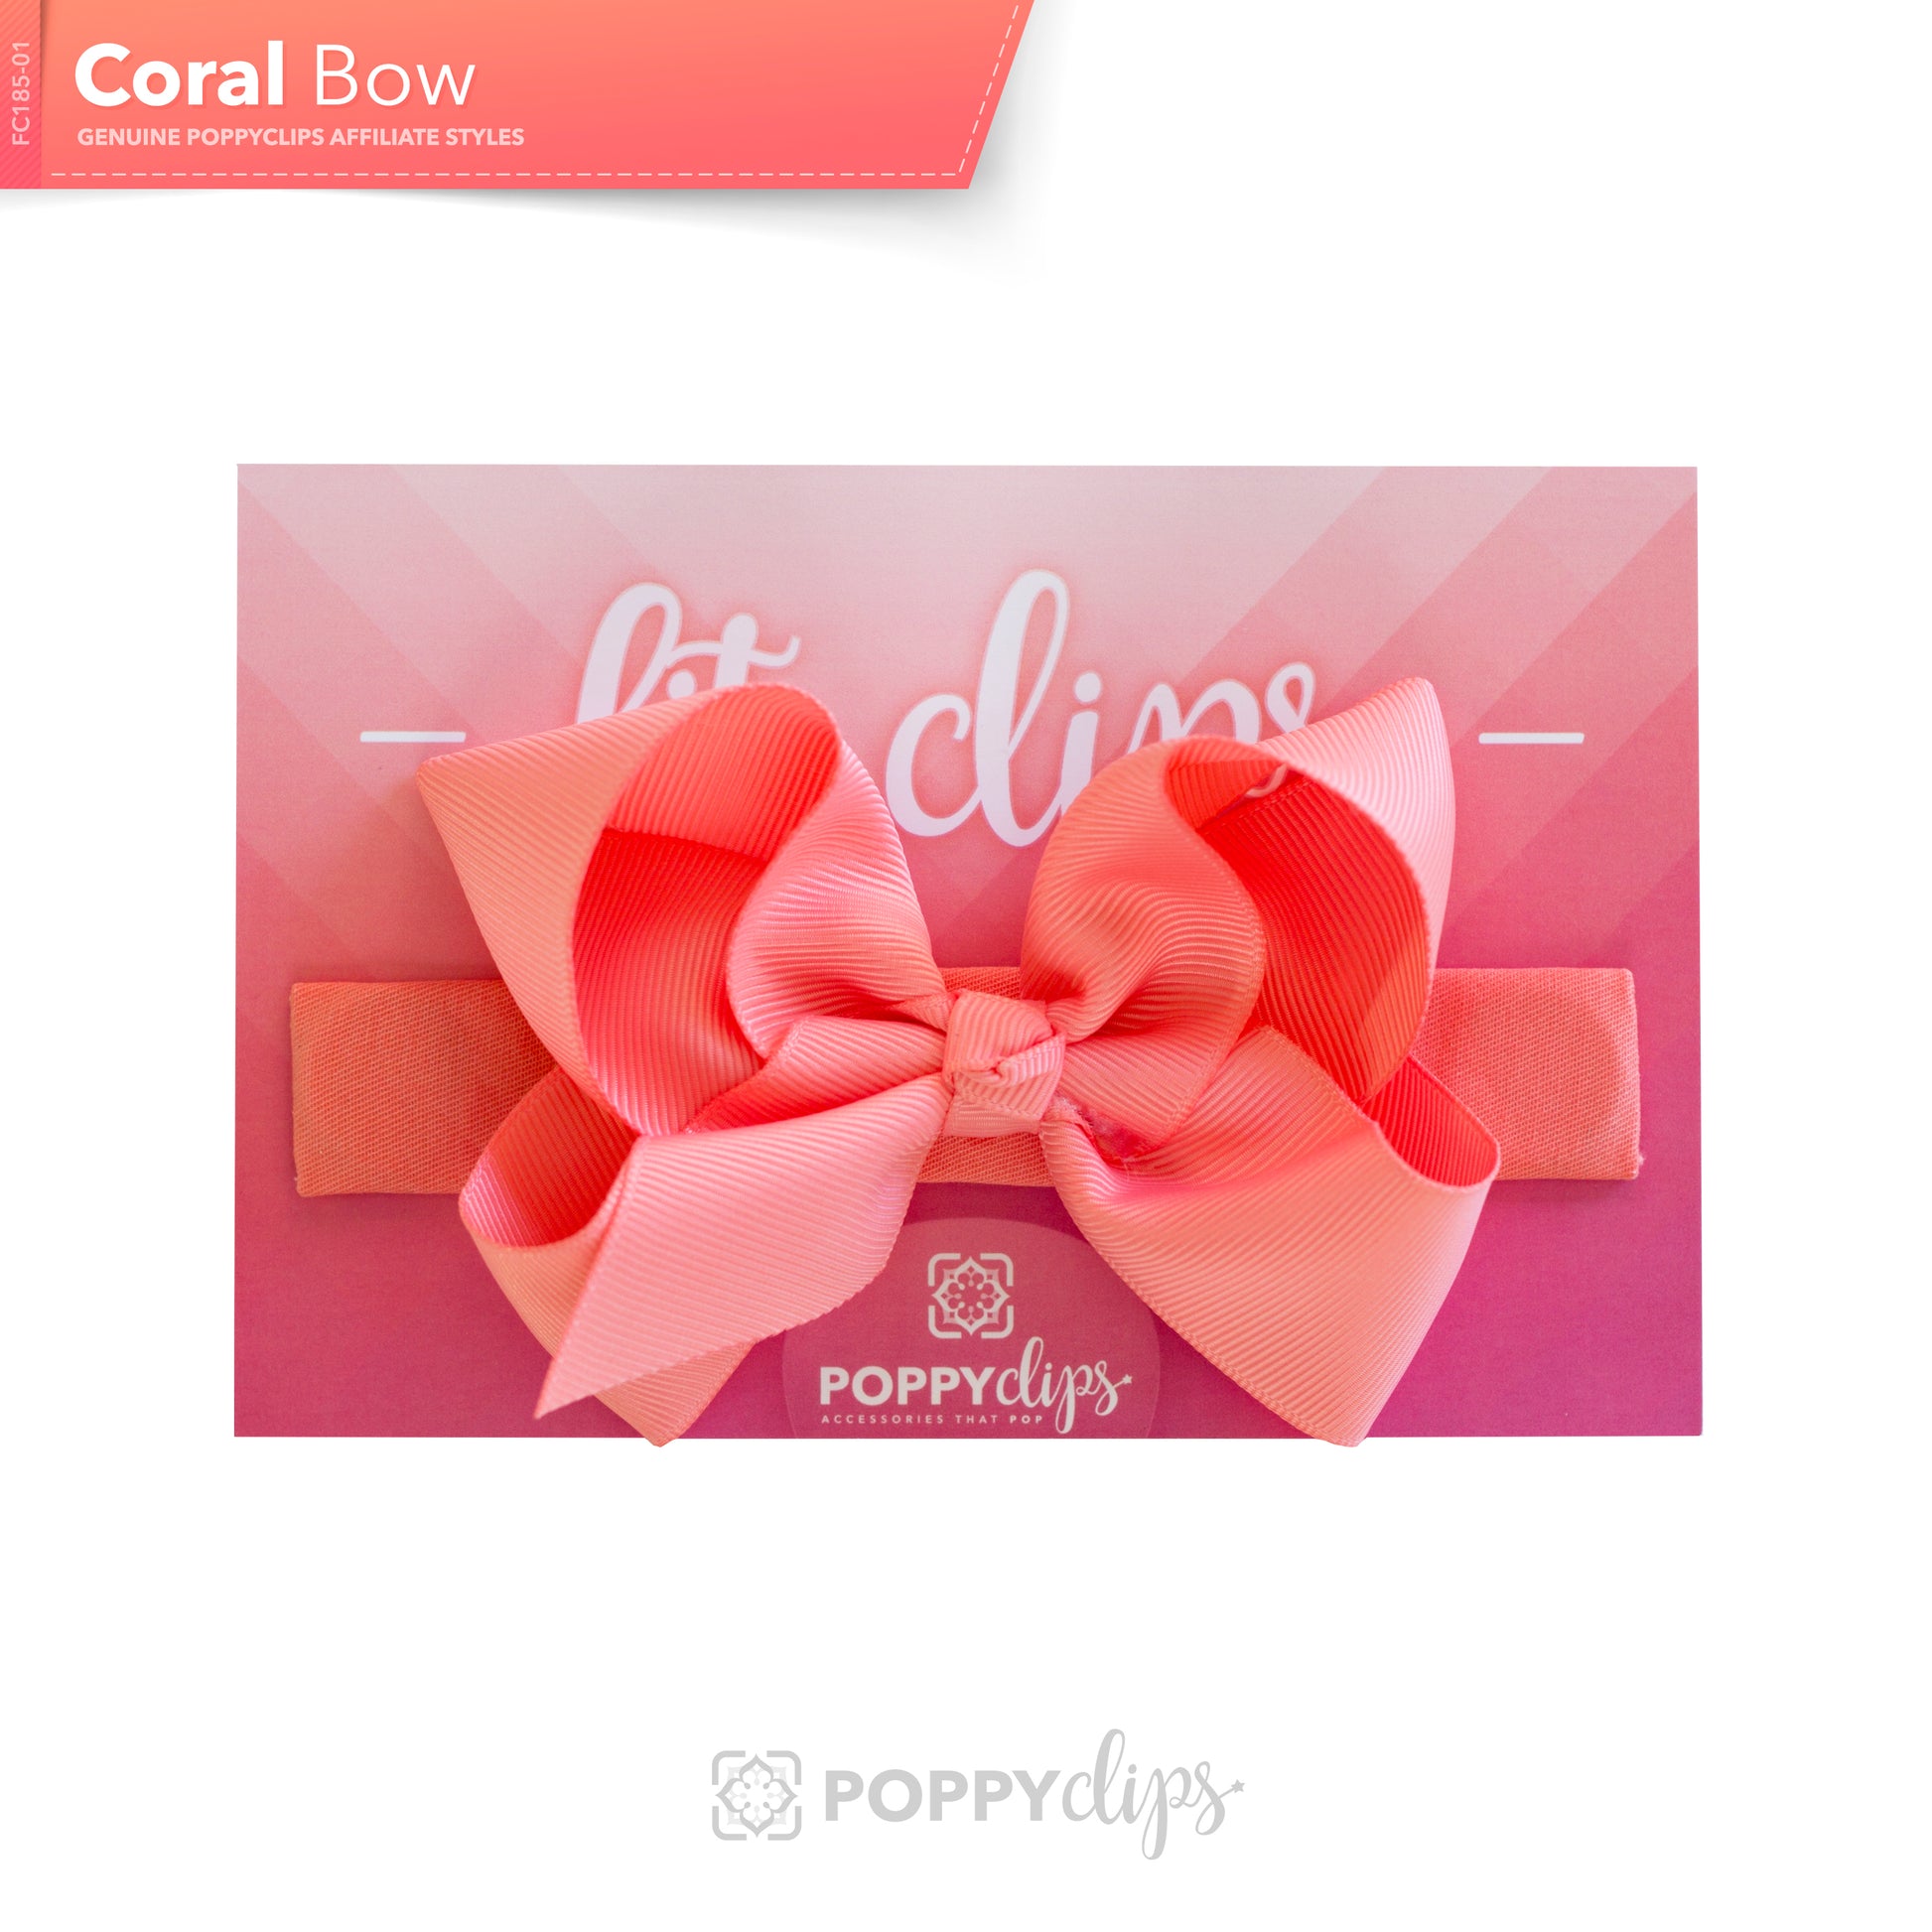 5 ¼” long by 7/8” wide coral material with hidden magnets at each end.  Centered on the outside is a double coral bow that is approximately 4” across.